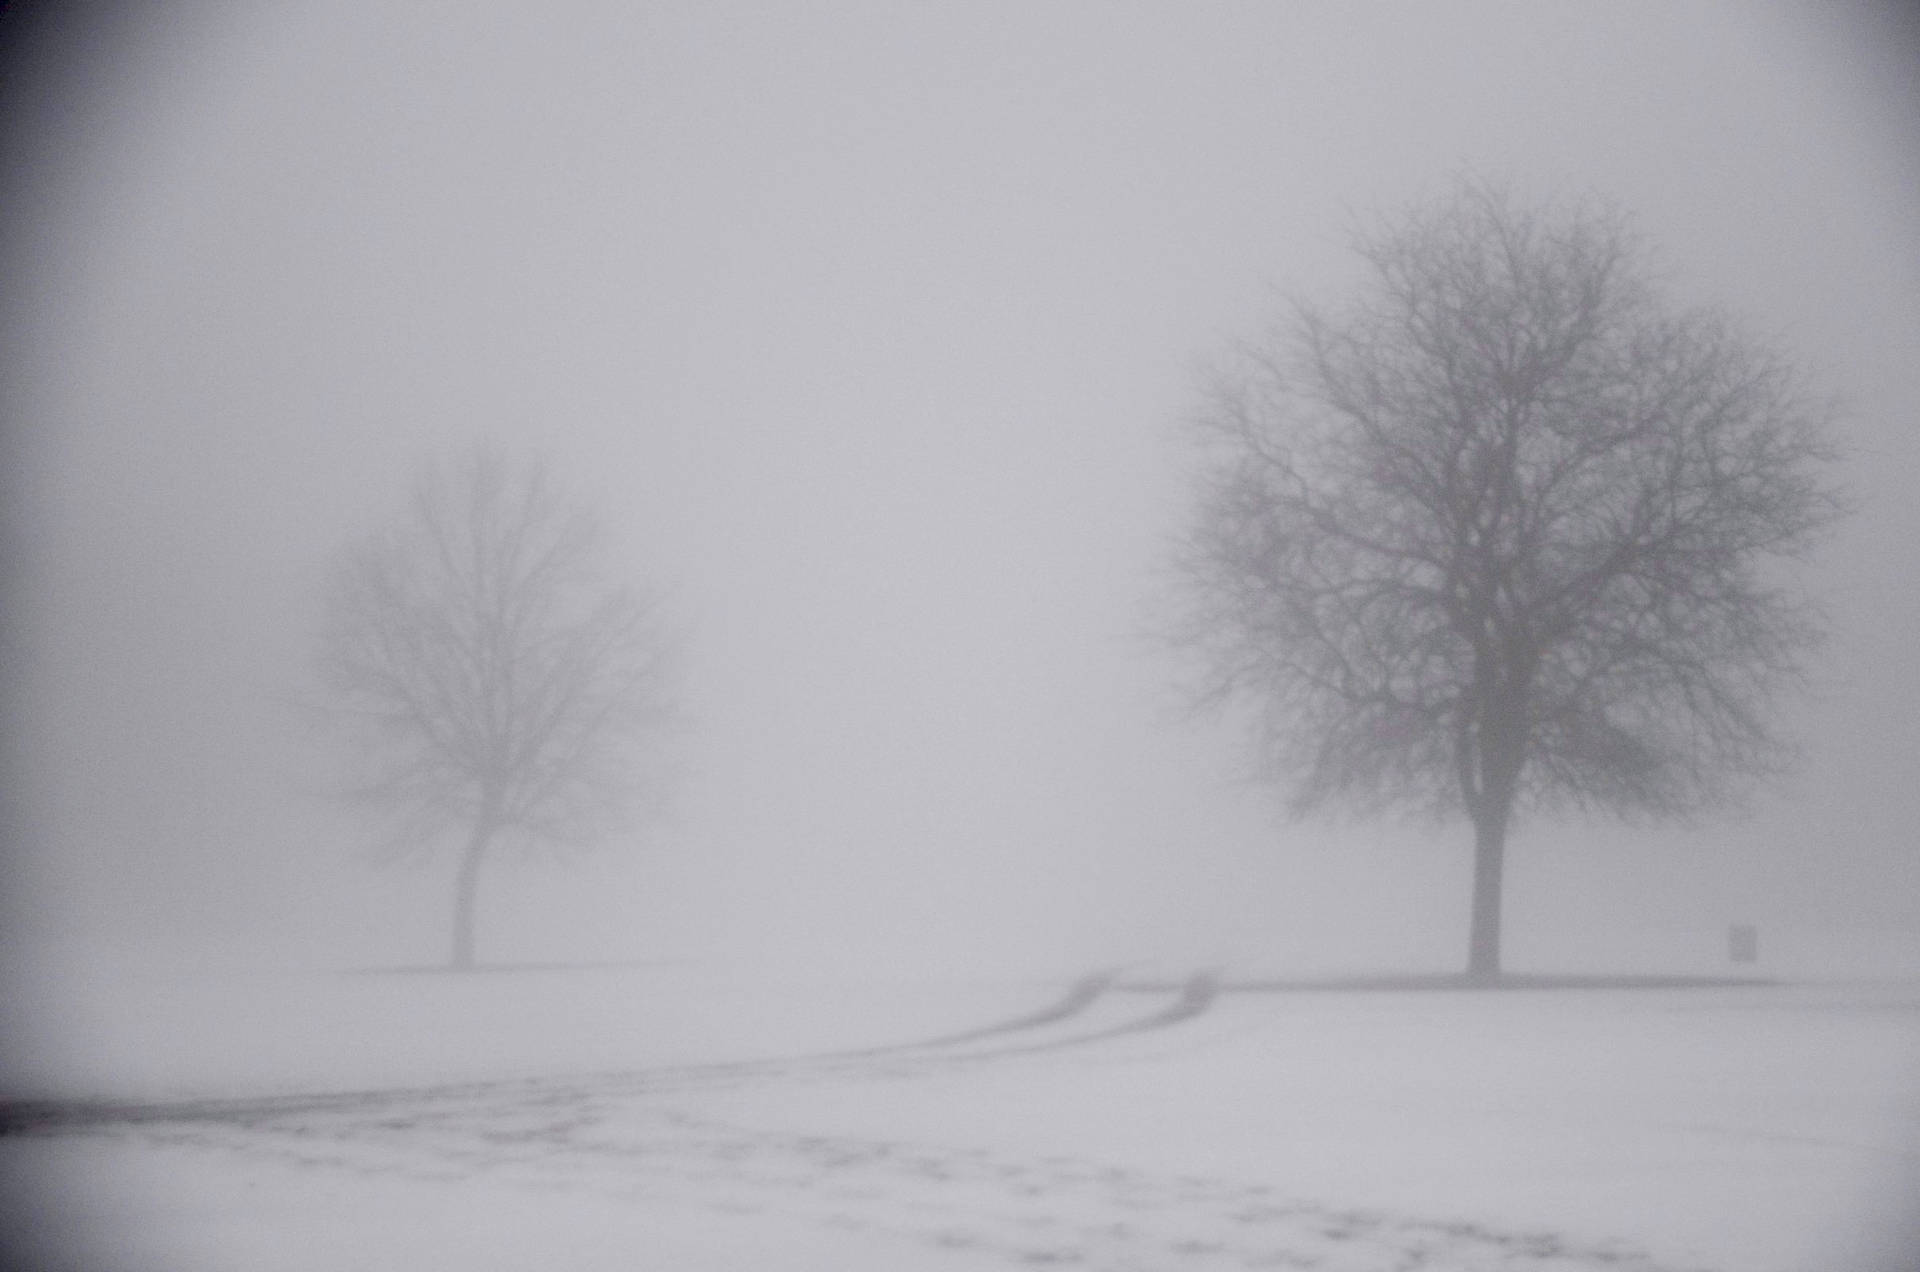 Ominous Foggy Snow-Covered Landscape Wallpaper